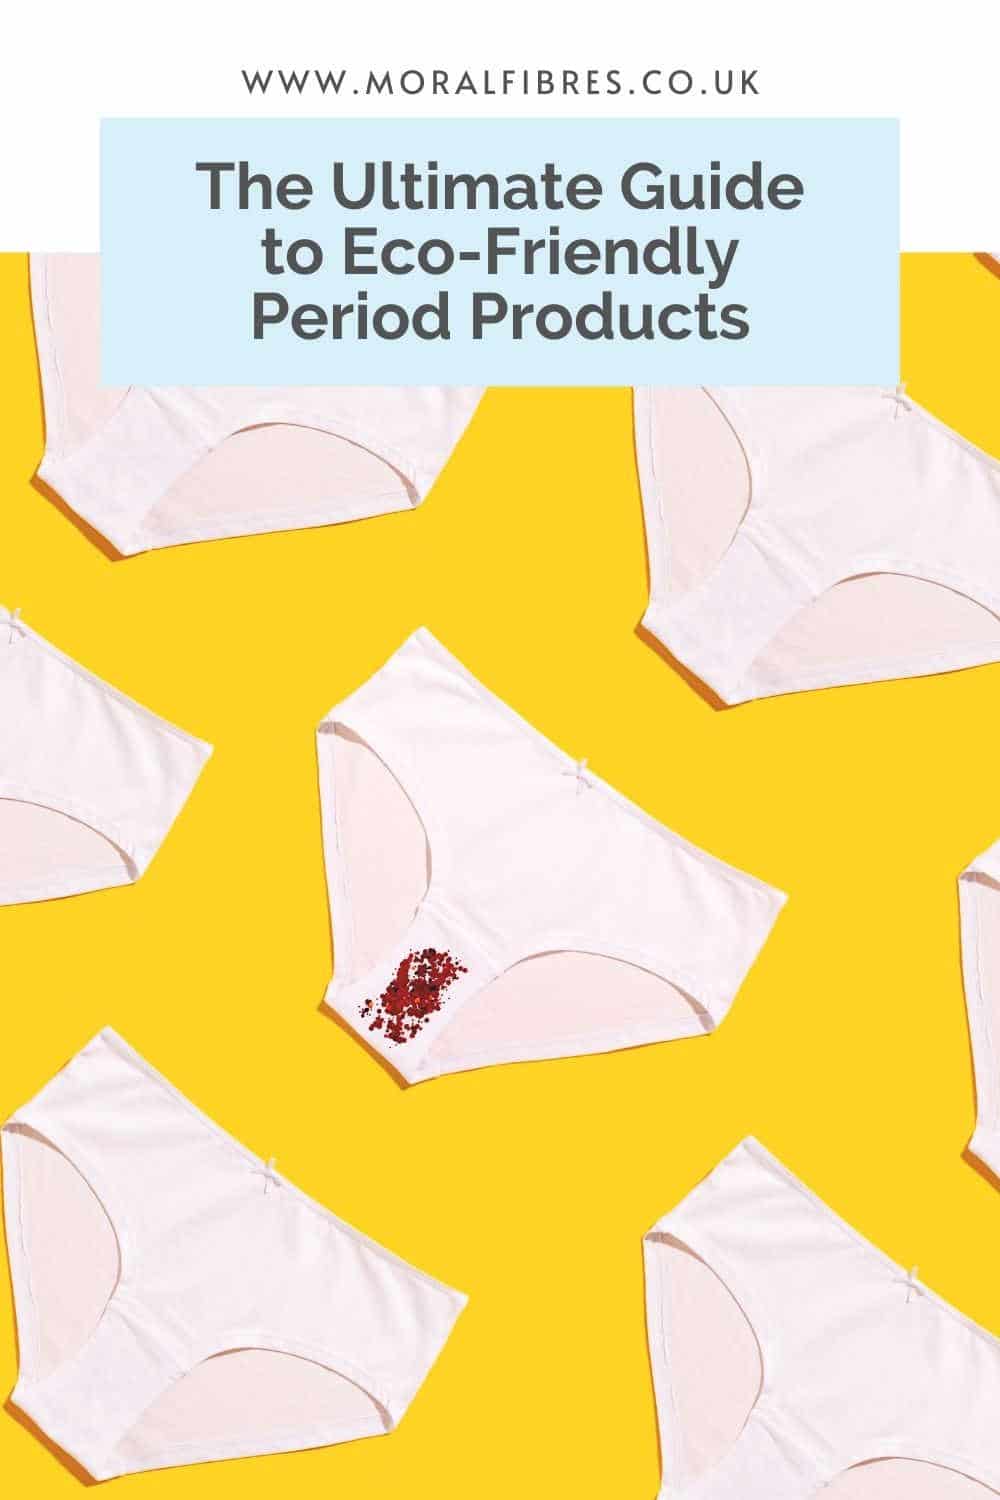 White knickers on a yellow background with a blue text box that says the ultimate guide to eco-friendly period products